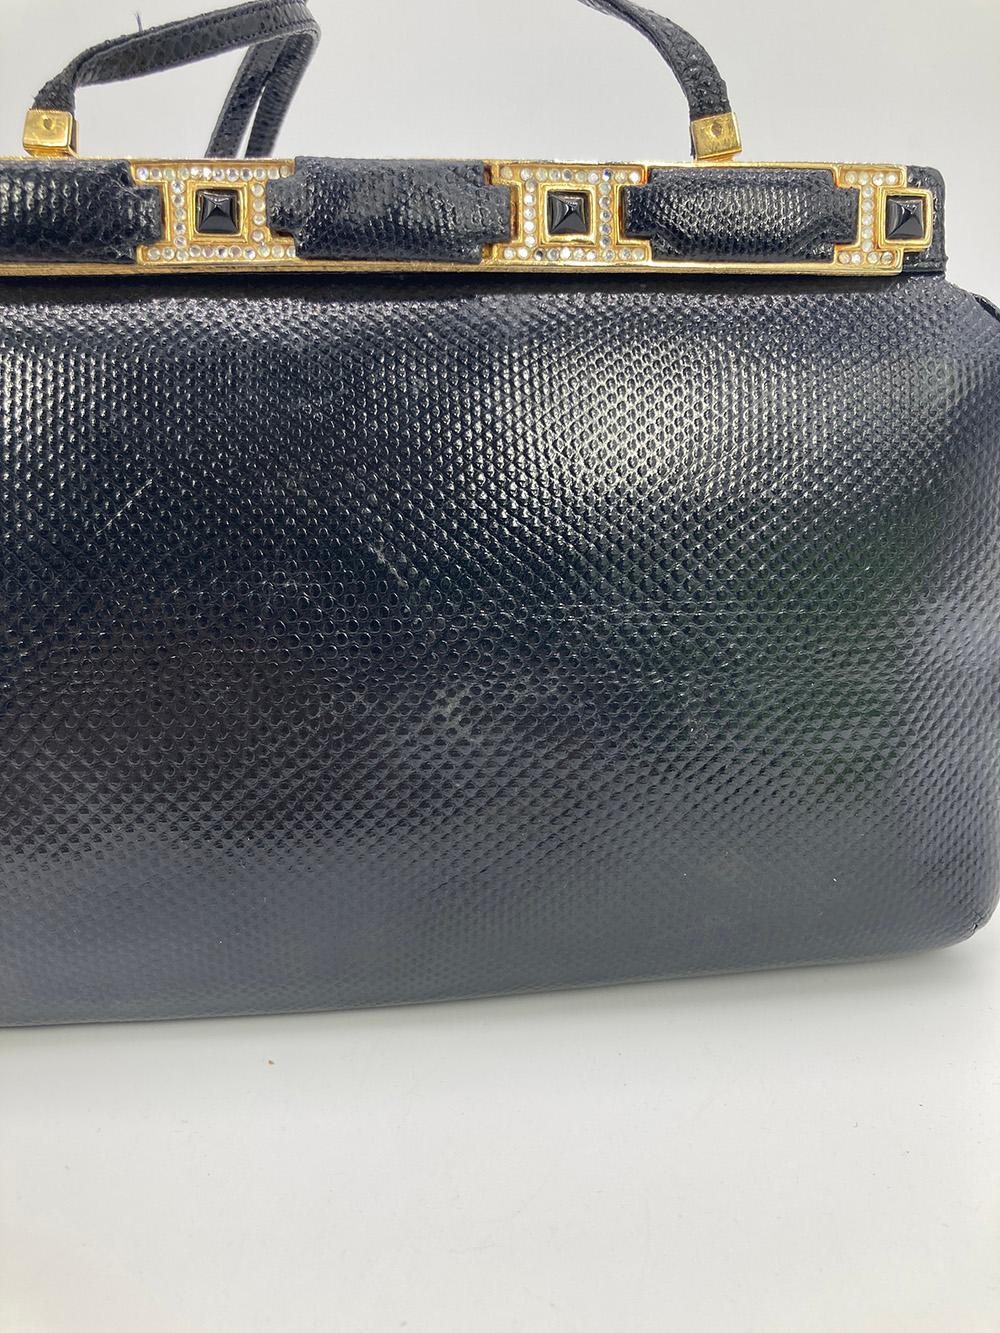 Judith Leiber Black Lizard Crystal and Leather Top Clutch For Sale 10